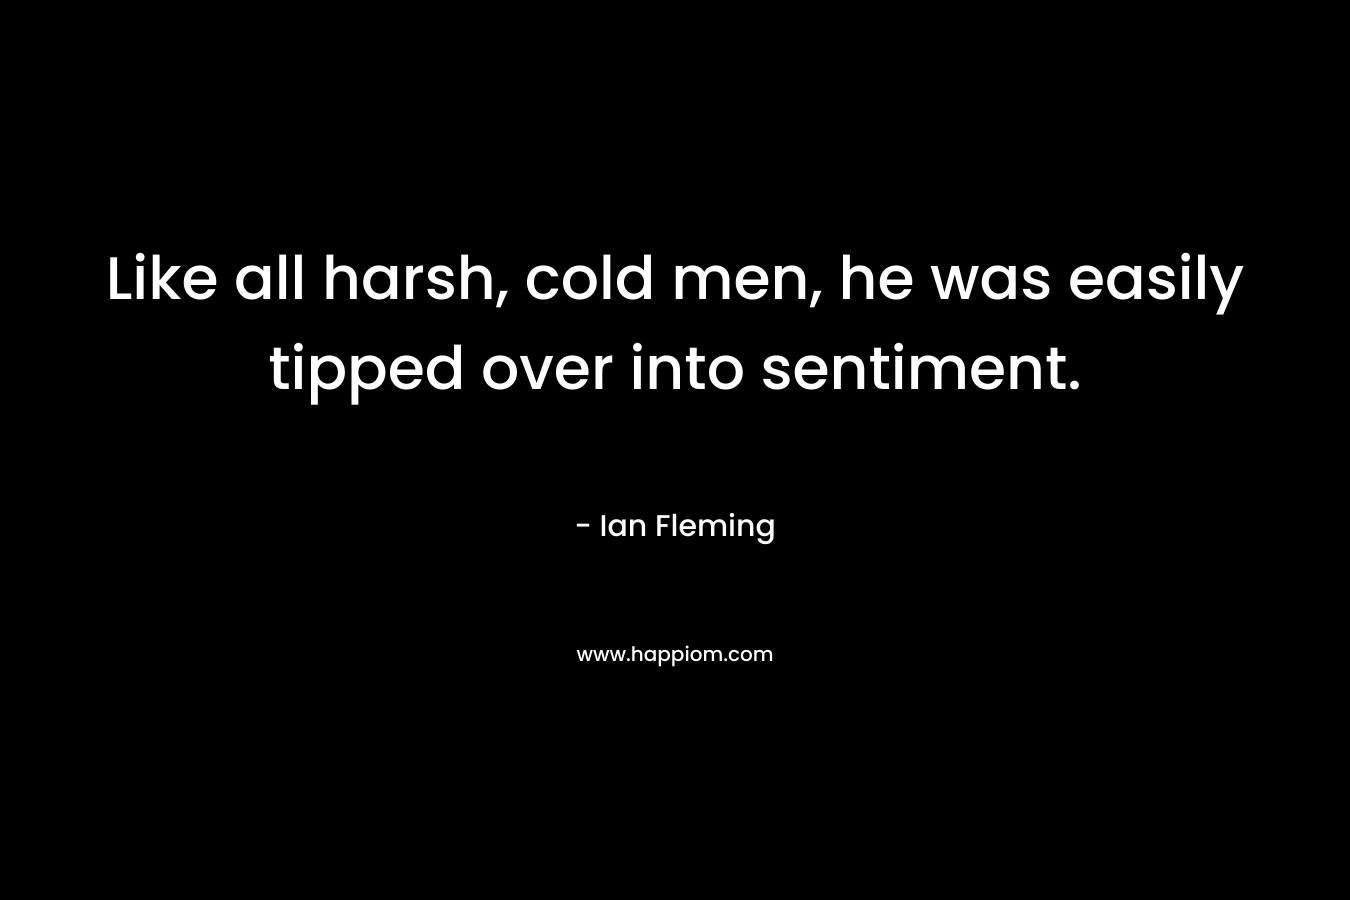 Like all harsh, cold men, he was easily tipped over into sentiment.